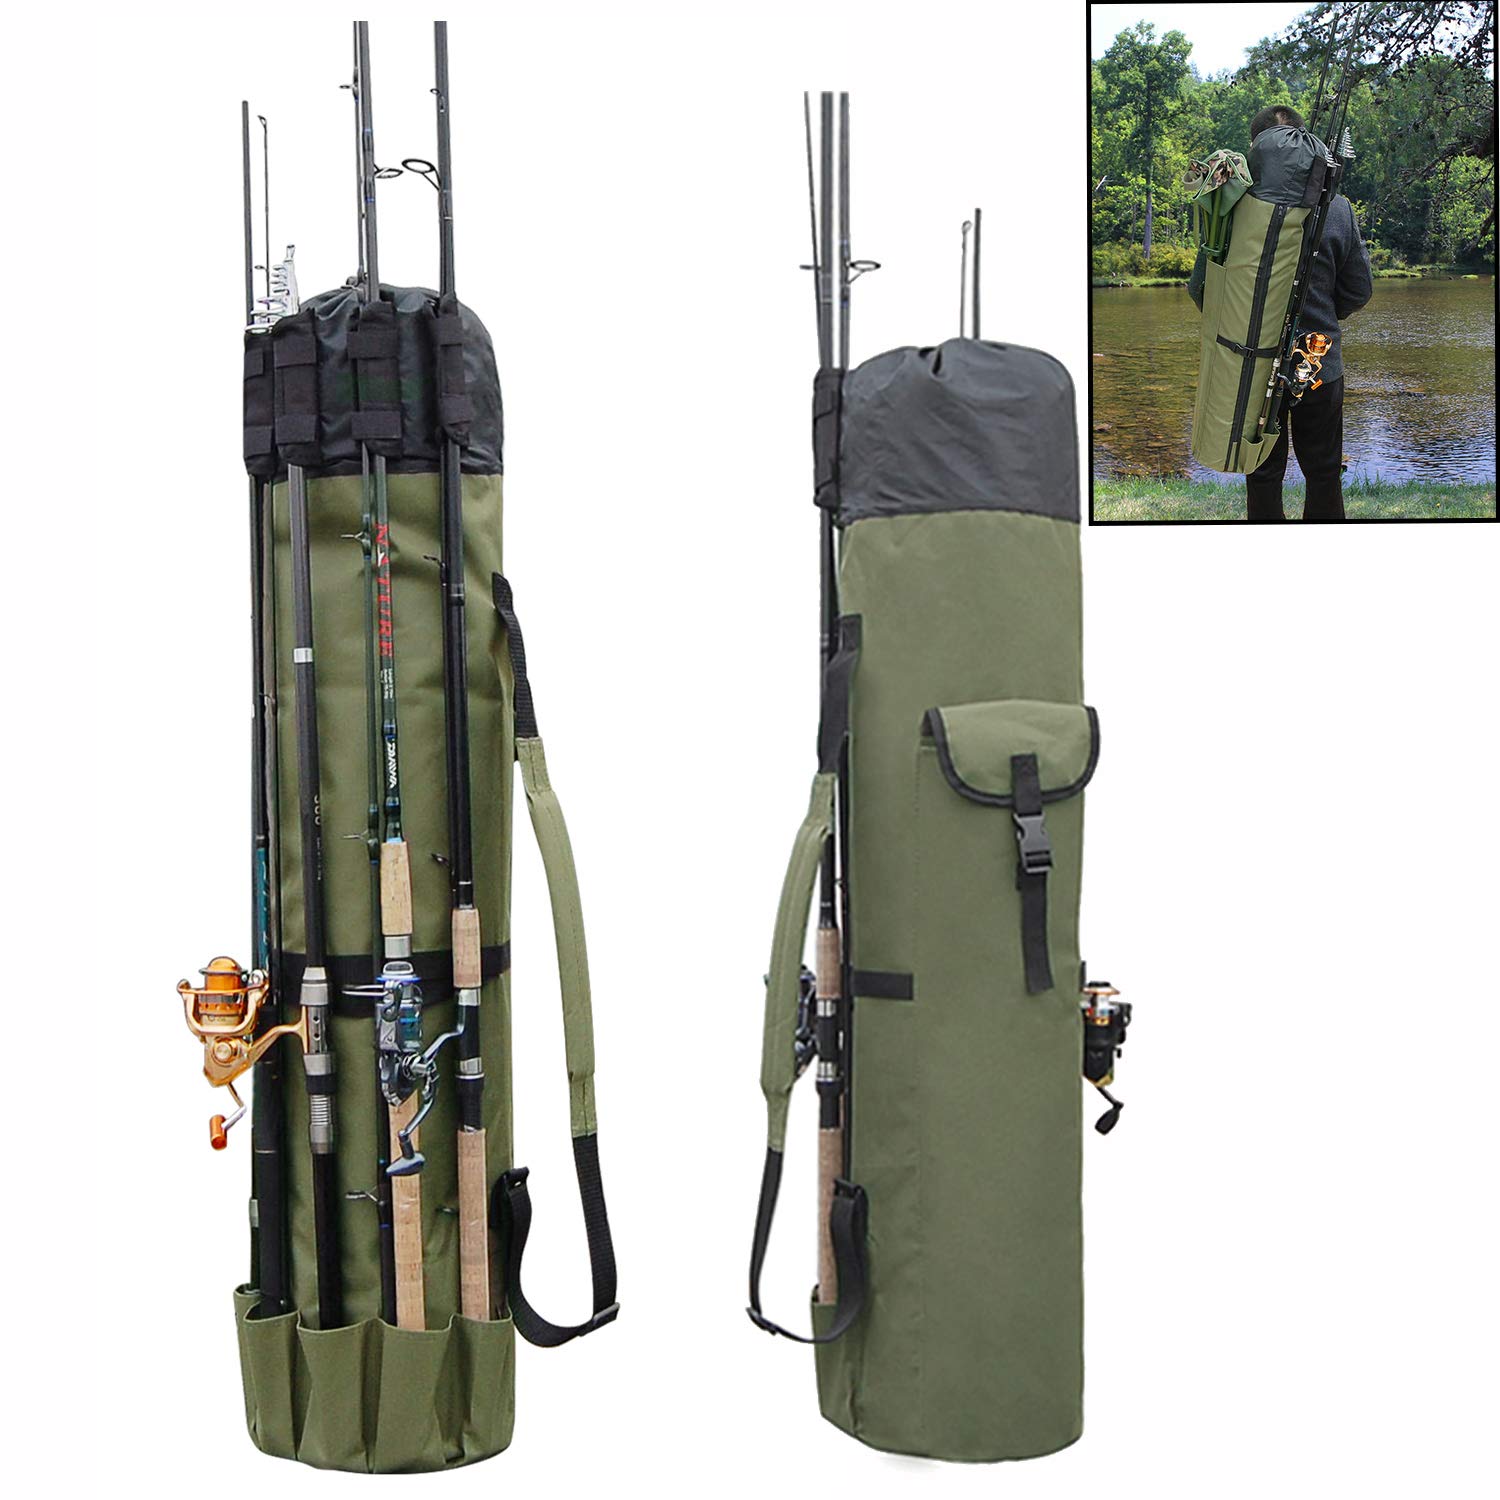  Toasis Fishing Rod Carrier Bag Fishing Pole Carrying